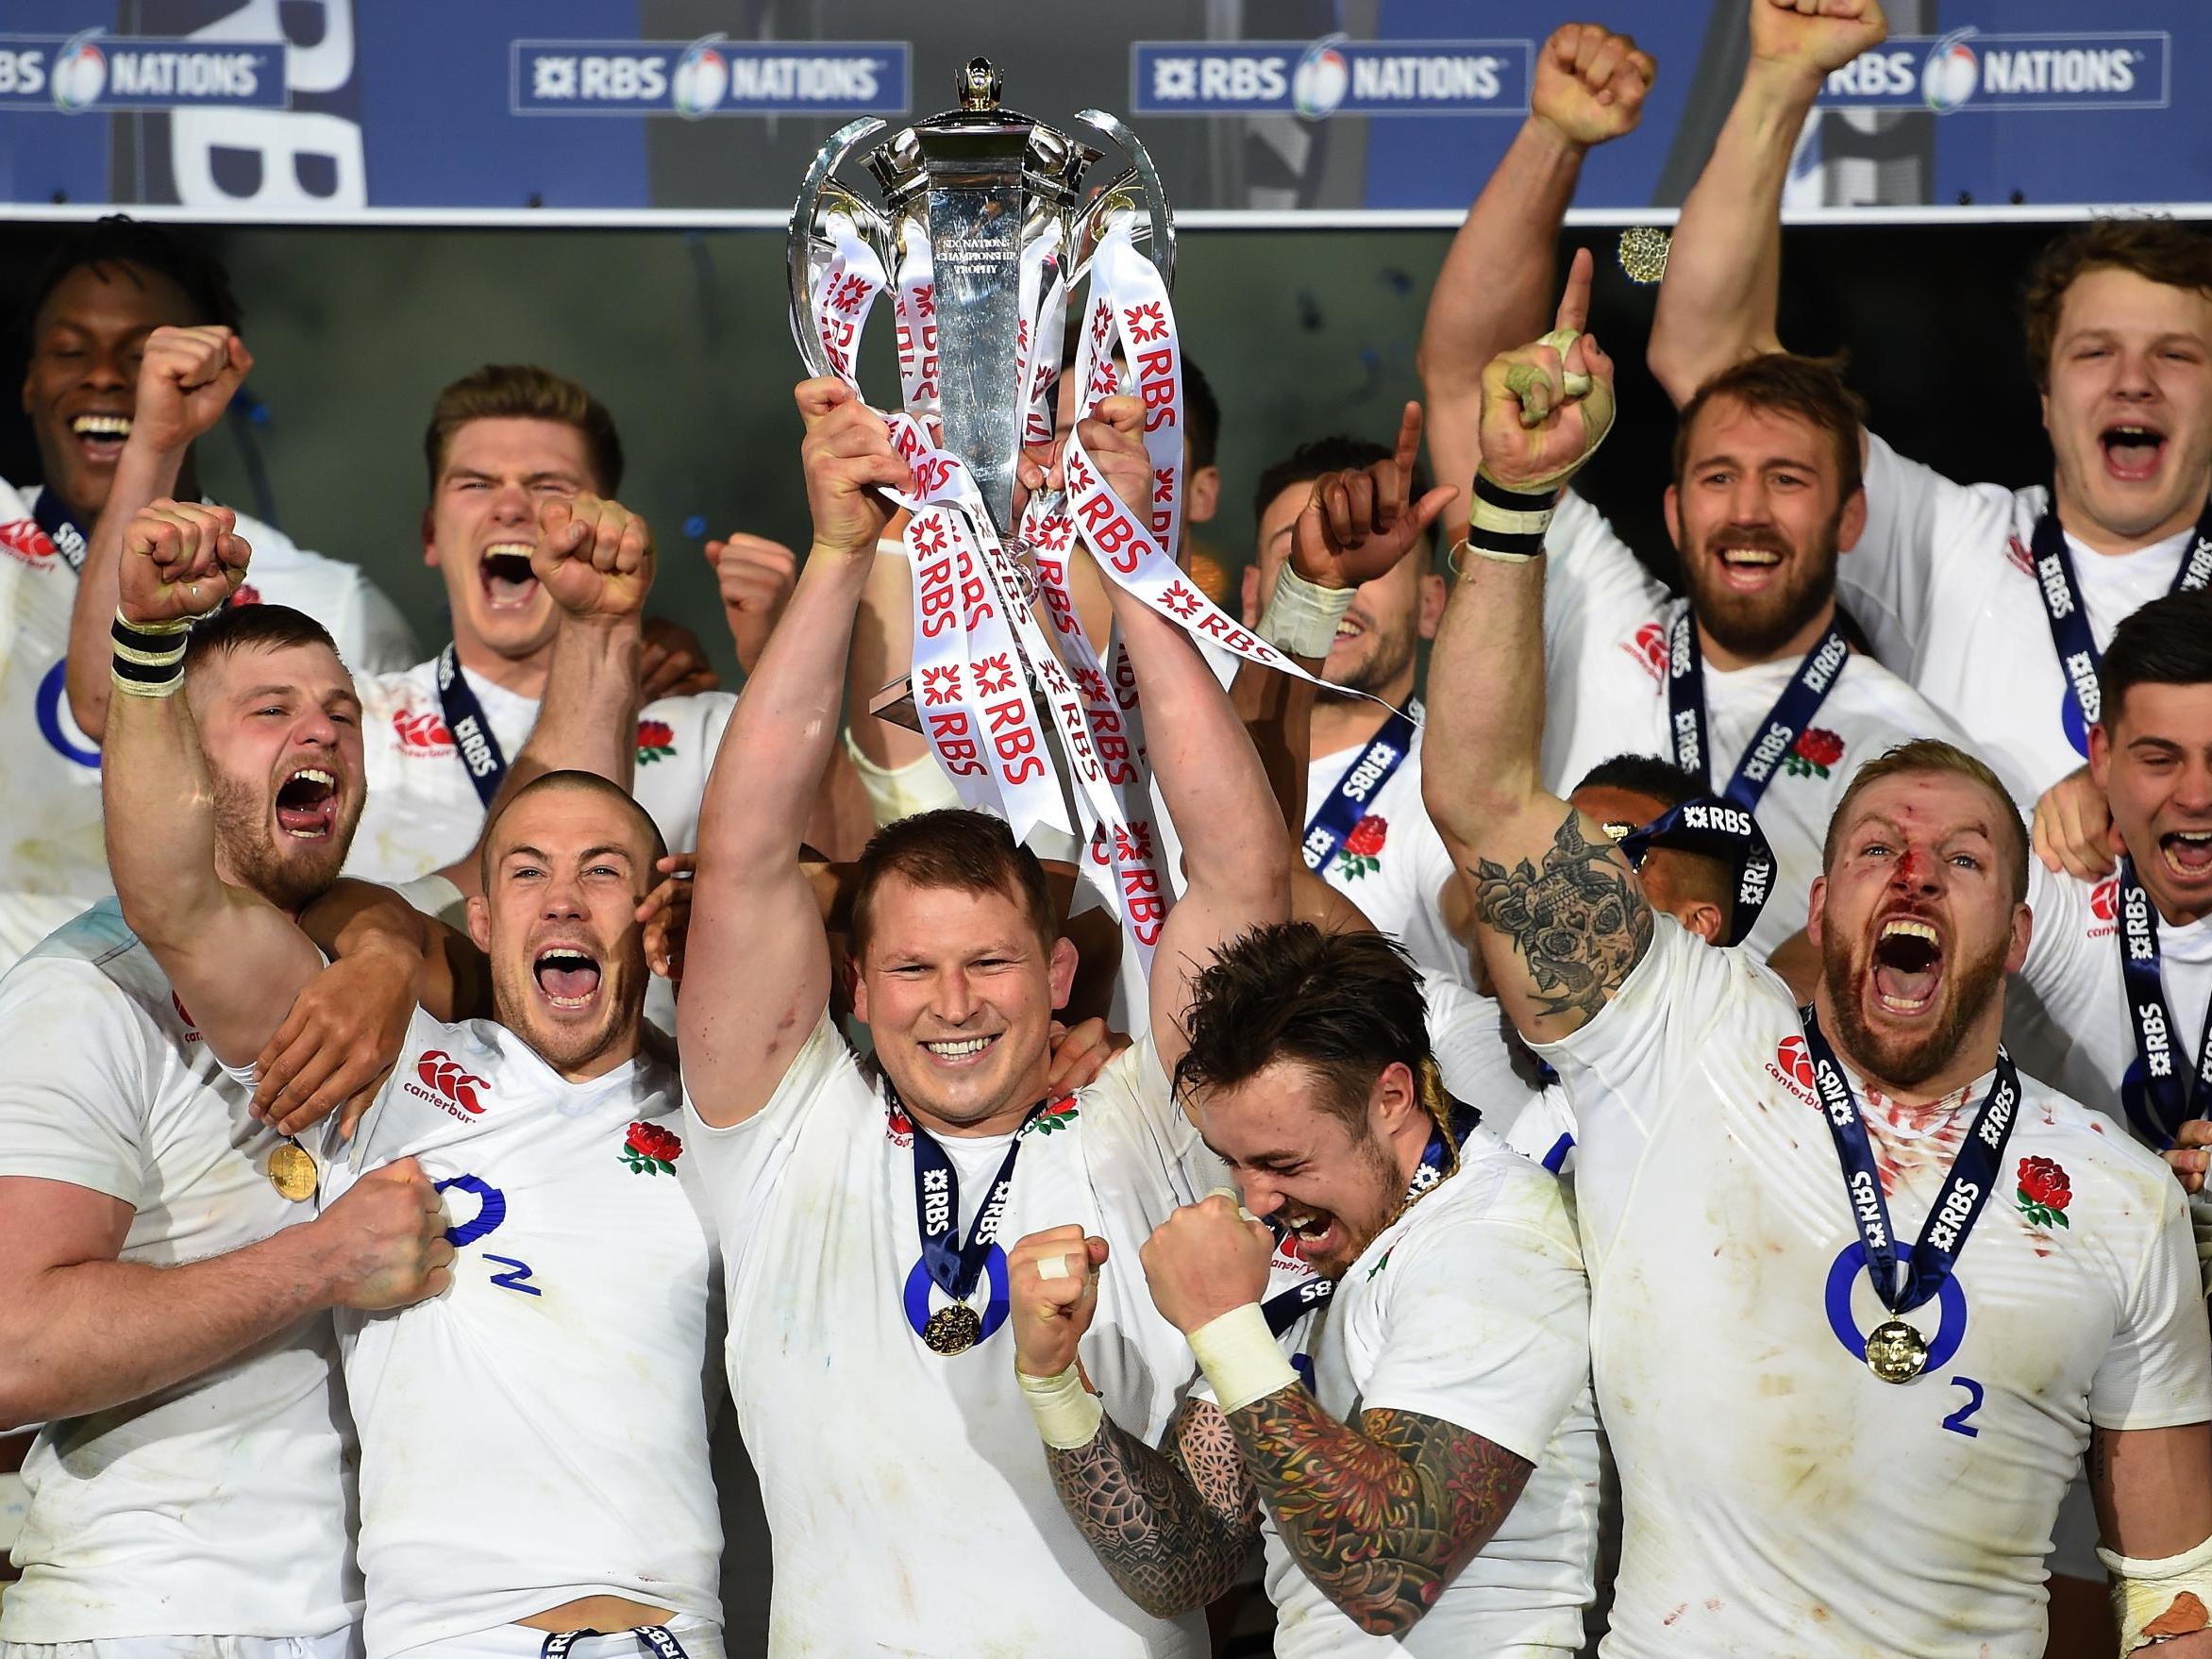 The RFU want to shorten the Six Nations once every four years to help the Lions tour